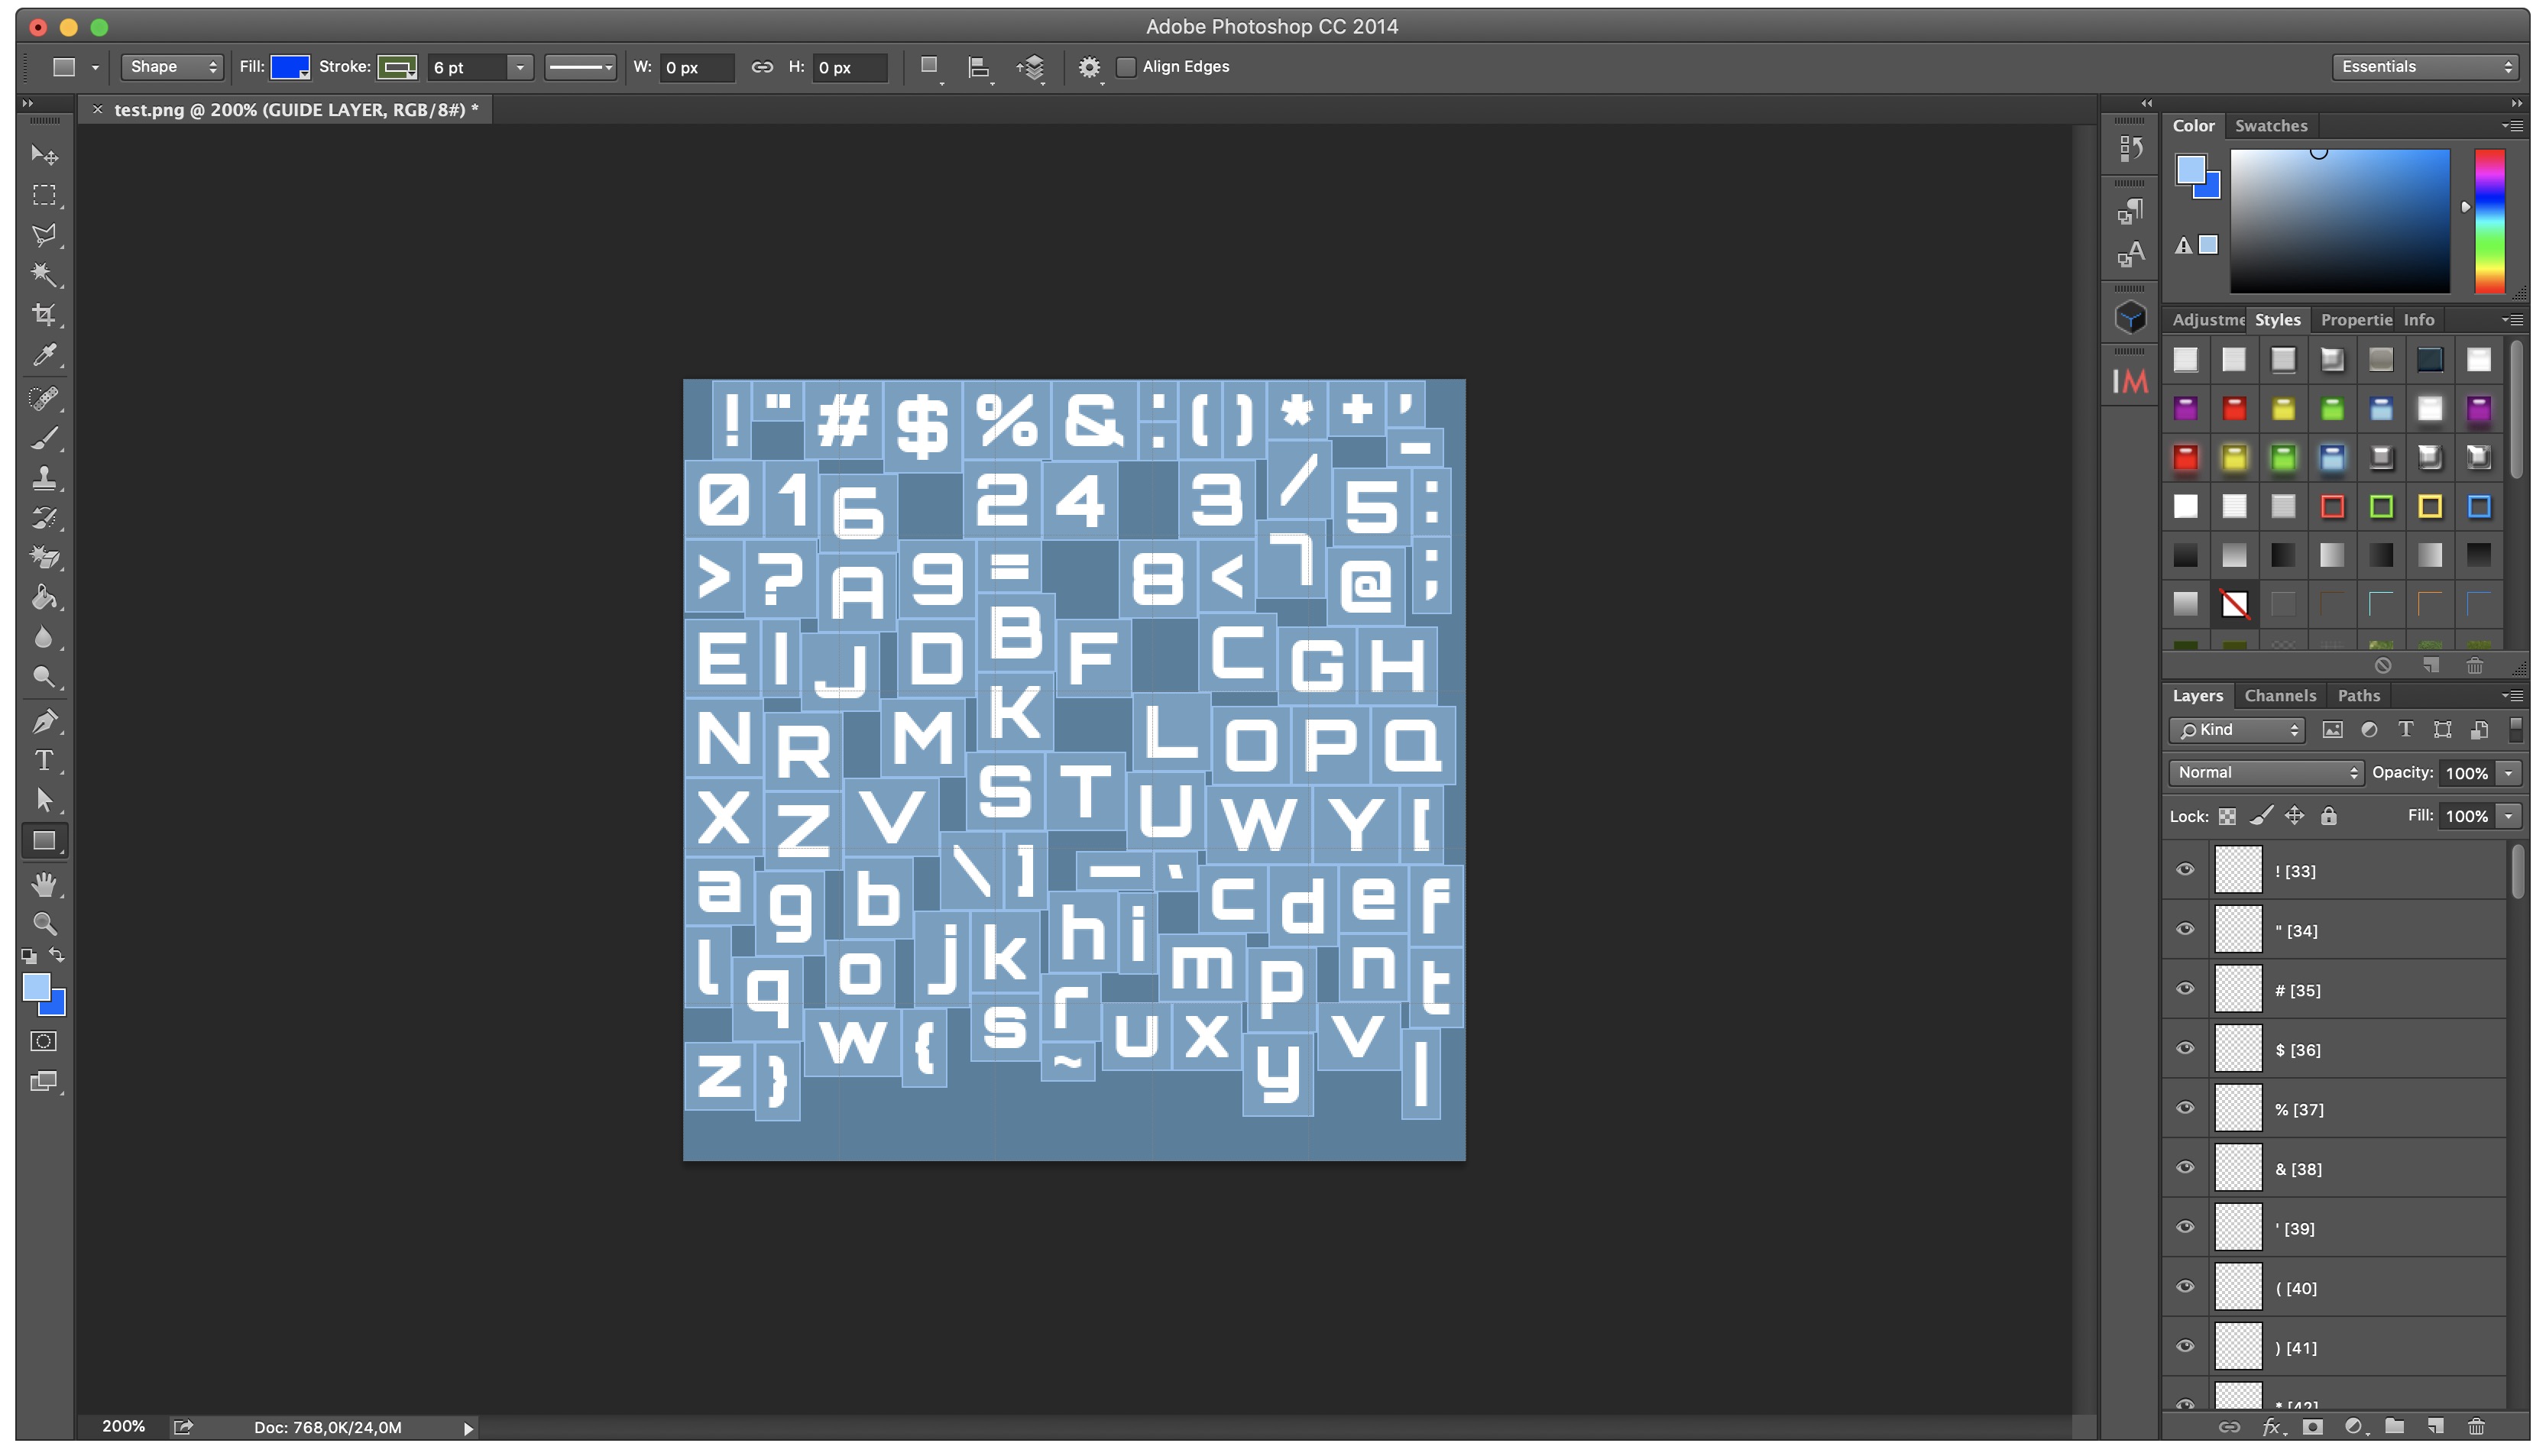 Custom bitmap fonts with freetypegl and Photoshop (styles)